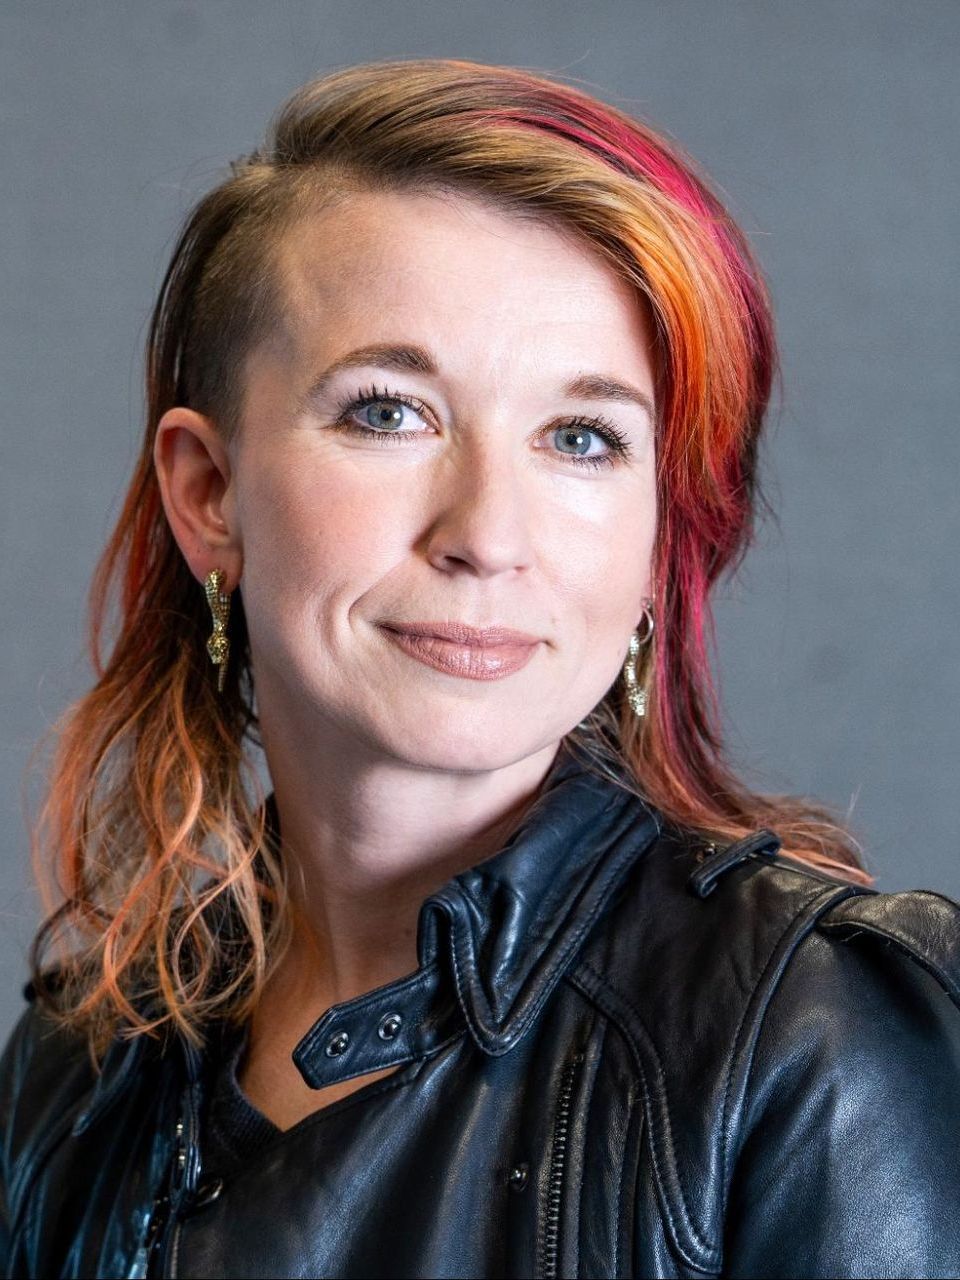 a woman with red hair is wearing a black leather jacket and earrings .